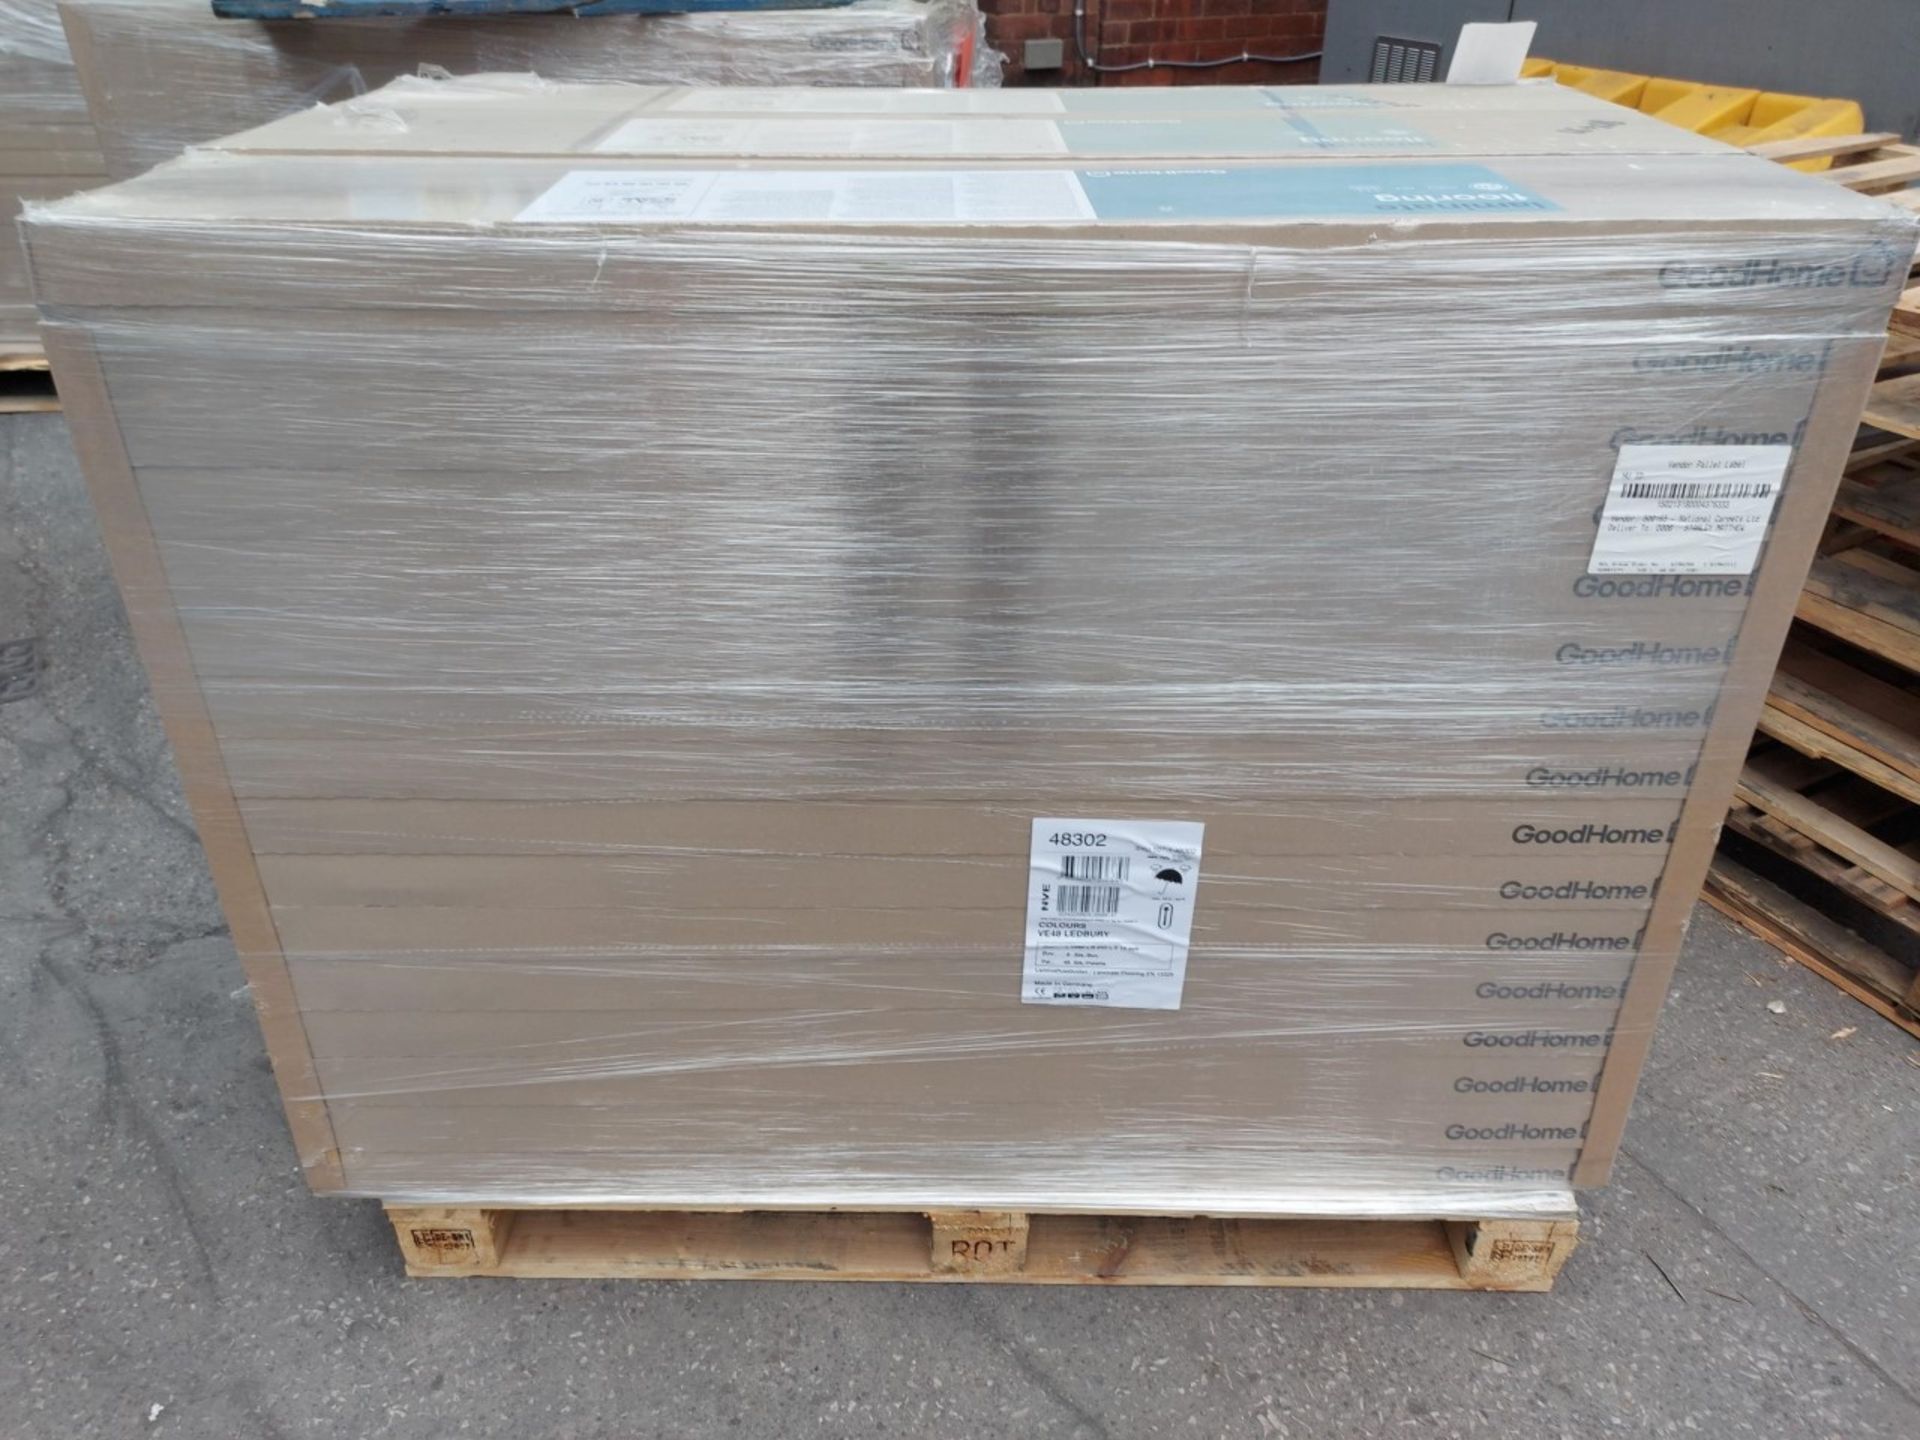 PALLET TO CONTAIN 16 NEW SEALED PACKS OF GOODHOME LEDBURY LIGHT BROWN OAK EFFECT 10MM LAMINATE